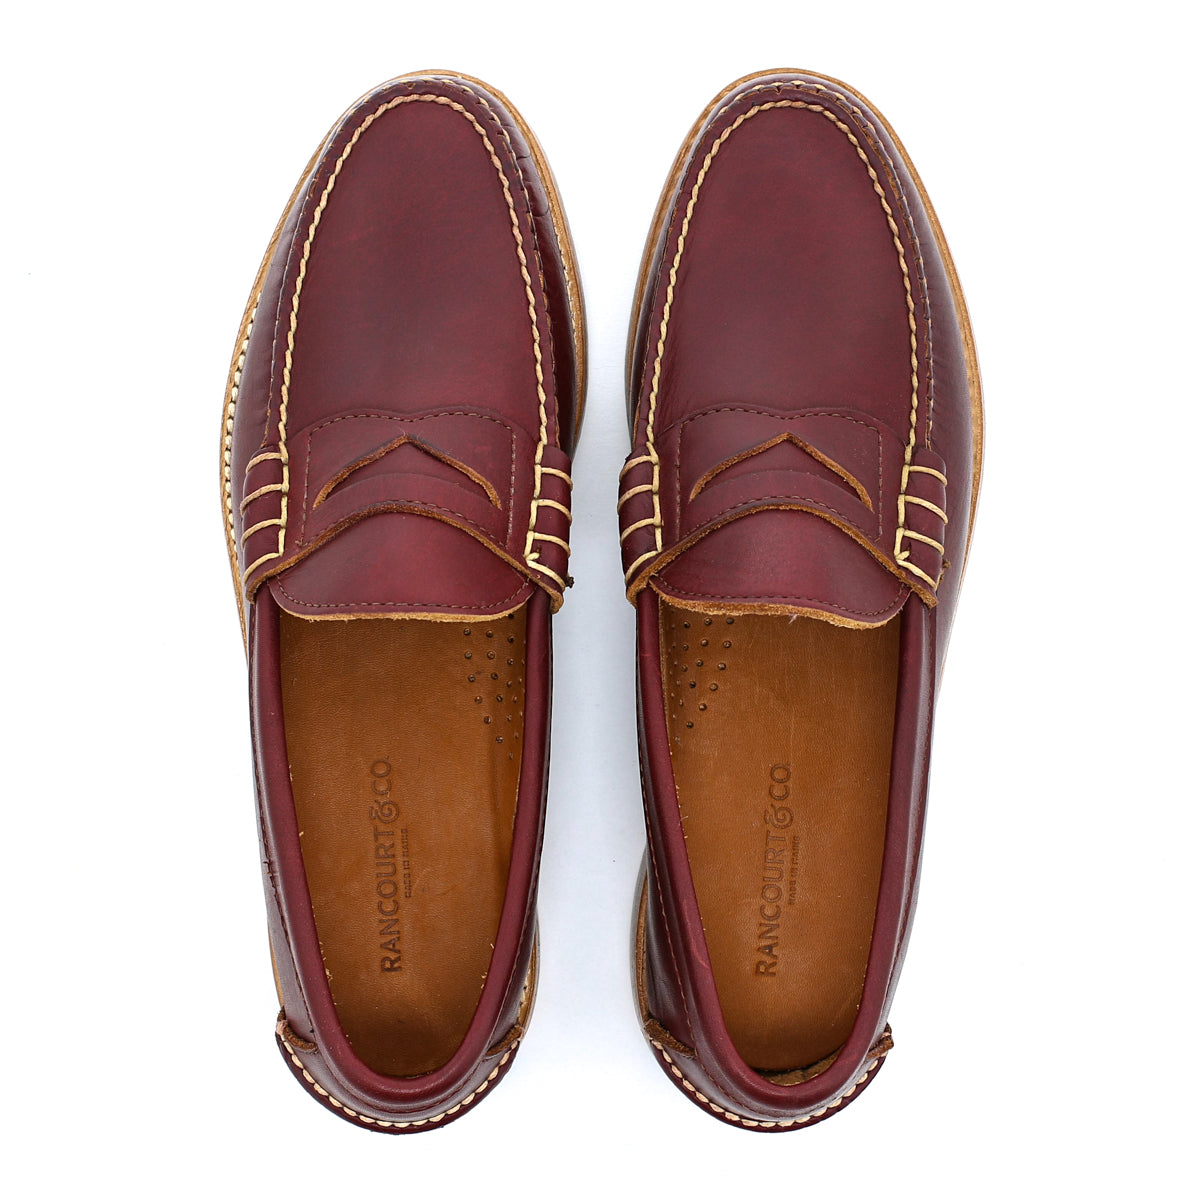 Beefroll Penny Loafers - Eggplant Honcho | Rancourt & Co. | Men's Boots ...